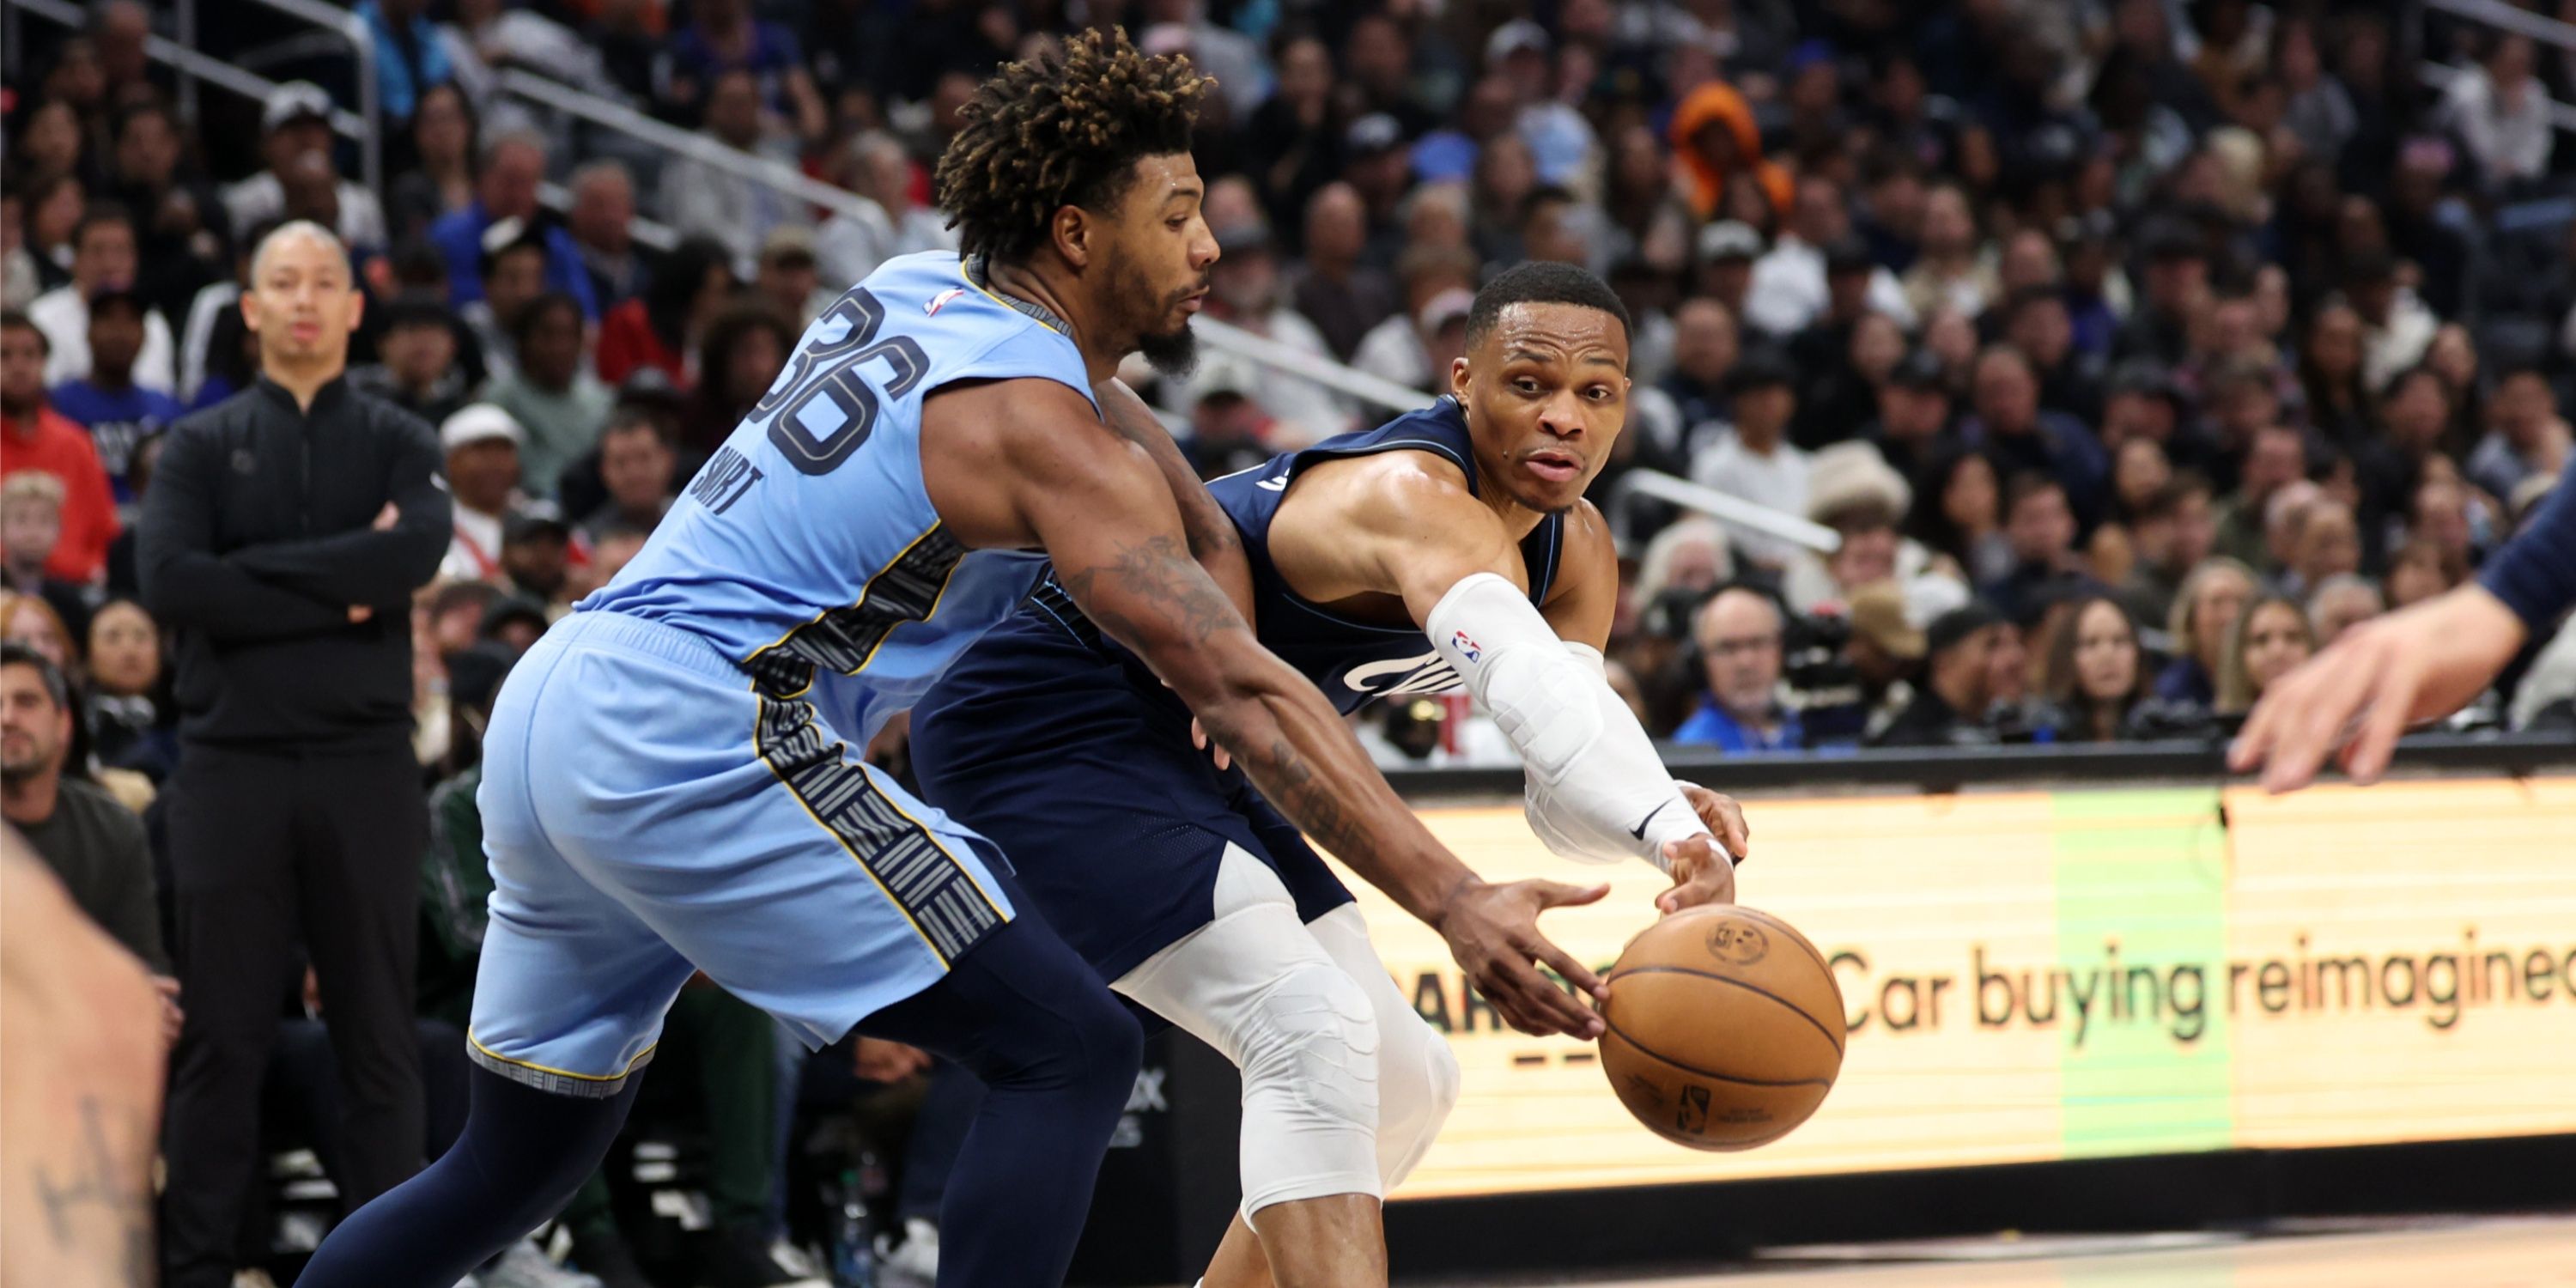 Grizzlies guard Marcus Smart deflects Clippers guard Russell Westbrook's pass